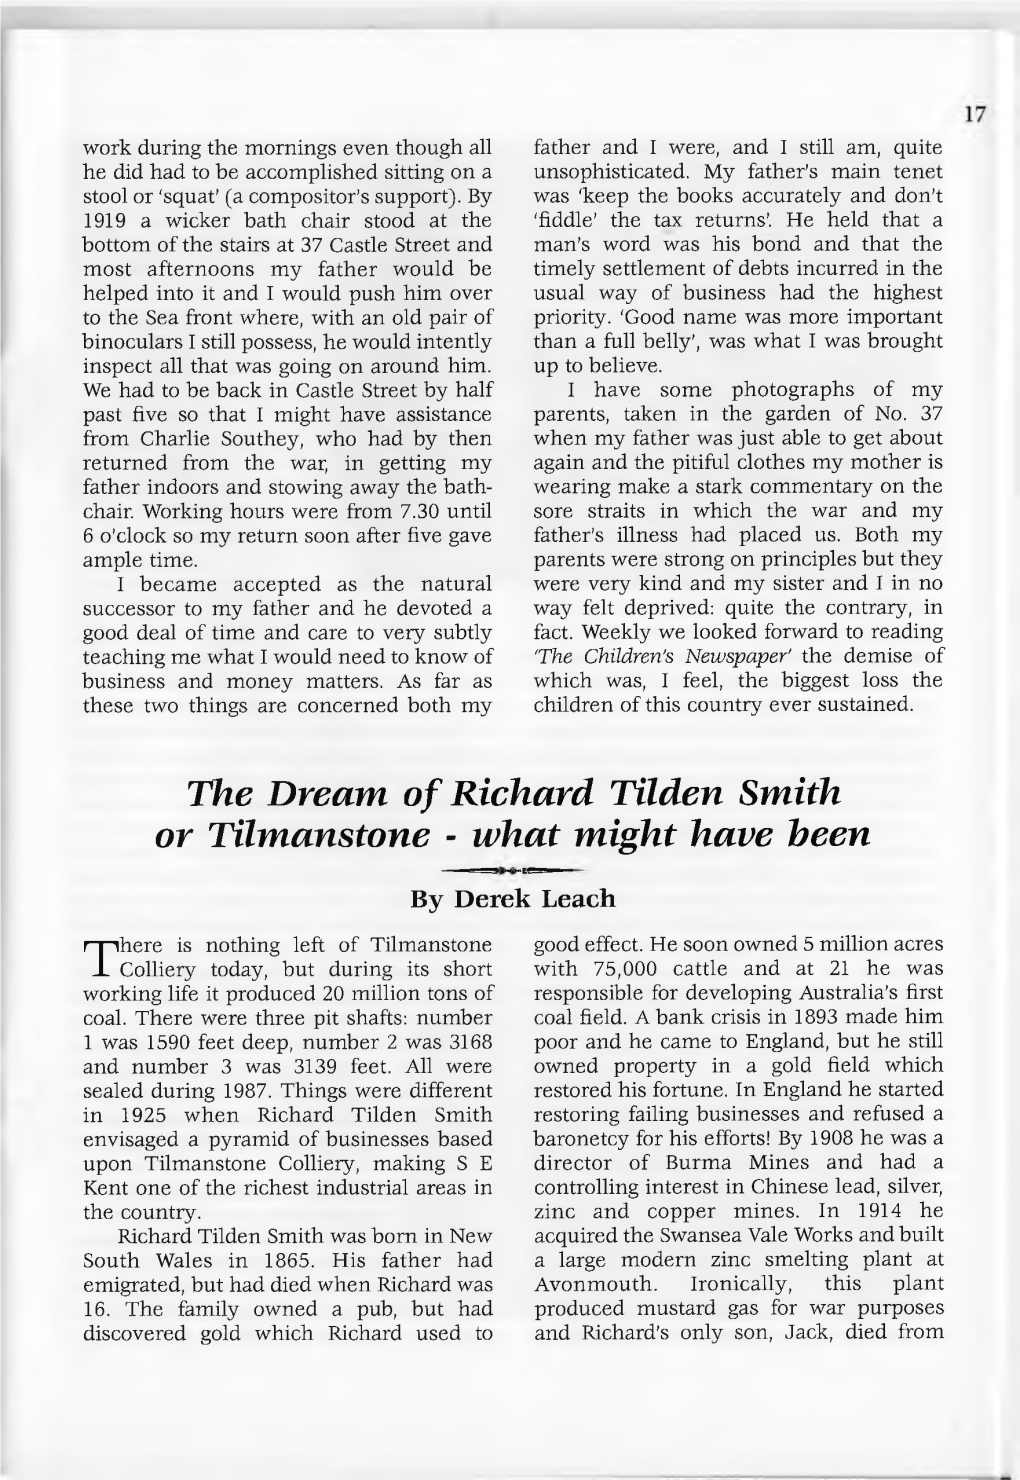 The Dream of Richard Tilden Smith Or Tilmanstone - What Might Have Been by Derek Leach Here Is Nothing Left of Tilmanstone Good Effect